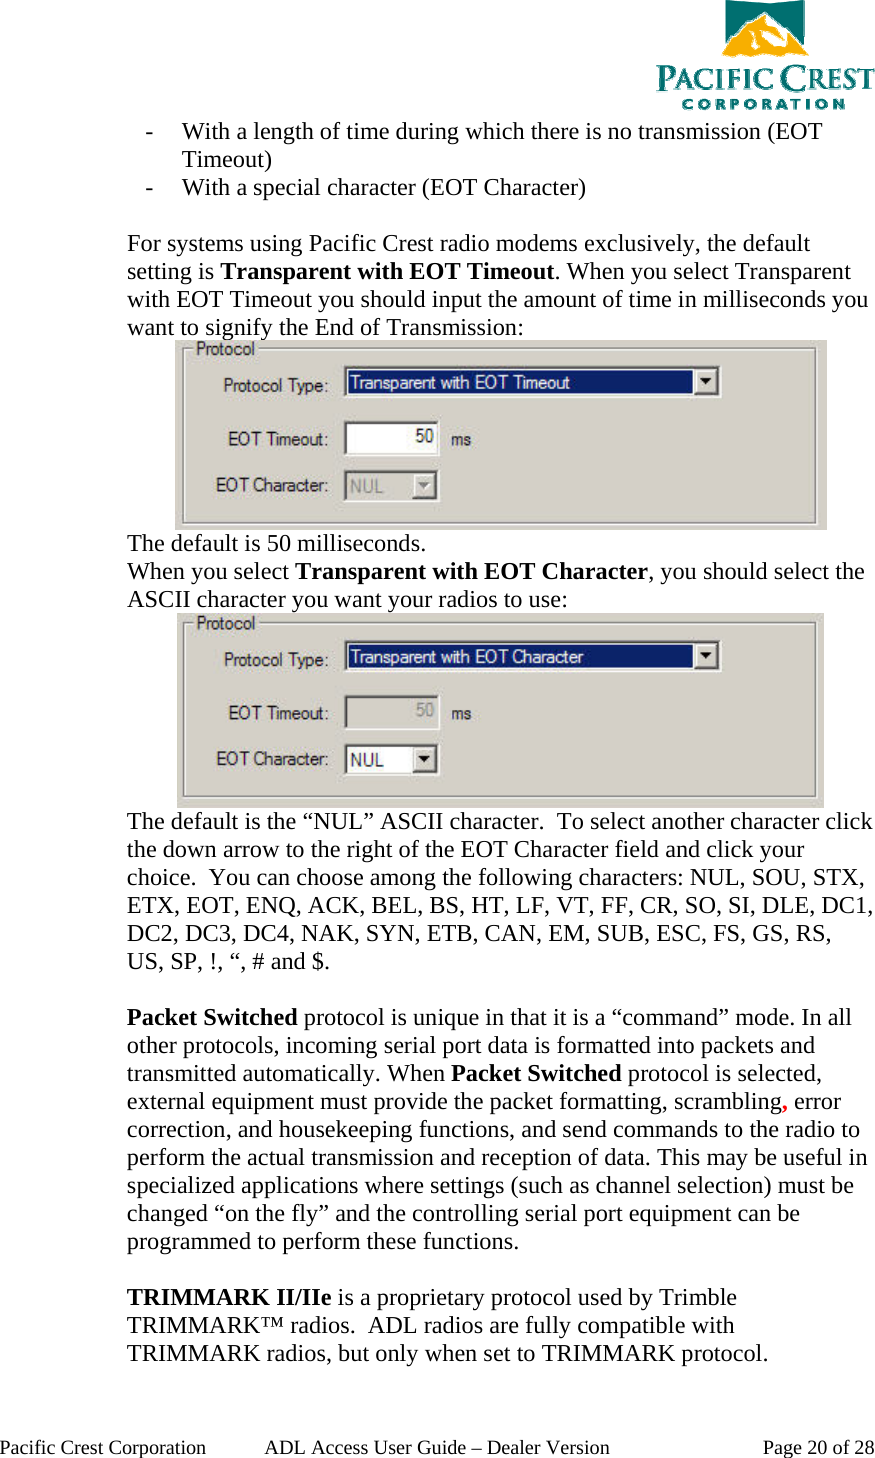  Pacific Crest Corporation  ADL Access User Guide – Dealer Version  Page 20 of 28 - With a length of time during which there is no transmission (EOT Timeout) - With a special character (EOT Character)  For systems using Pacific Crest radio modems exclusively, the default setting is Transparent with EOT Timeout. When you select Transparent with EOT Timeout you should input the amount of time in milliseconds you want to signify the End of Transmission:  The default is 50 milliseconds.   When you select Transparent with EOT Character, you should select the ASCII character you want your radios to use:  The default is the “NUL” ASCII character.  To select another character click the down arrow to the right of the EOT Character field and click your choice.  You can choose among the following characters: NUL, SOU, STX, ETX, EOT, ENQ, ACK, BEL, BS, HT, LF, VT, FF, CR, SO, SI, DLE, DC1, DC2, DC3, DC4, NAK, SYN, ETB, CAN, EM, SUB, ESC, FS, GS, RS, US, SP, !, “, # and $.  Packet Switched protocol is unique in that it is a “command” mode. In all other protocols, incoming serial port data is formatted into packets and transmitted automatically. When Packet Switched protocol is selected, external equipment must provide the packet formatting, scrambling, error correction, and housekeeping functions, and send commands to the radio to perform the actual transmission and reception of data. This may be useful in specialized applications where settings (such as channel selection) must be changed “on the fly” and the controlling serial port equipment can be programmed to perform these functions.  TRIMMARK II/IIe is a proprietary protocol used by Trimble TRIMMARK™ radios.  ADL radios are fully compatible with TRIMMARK radios, but only when set to TRIMMARK protocol. 